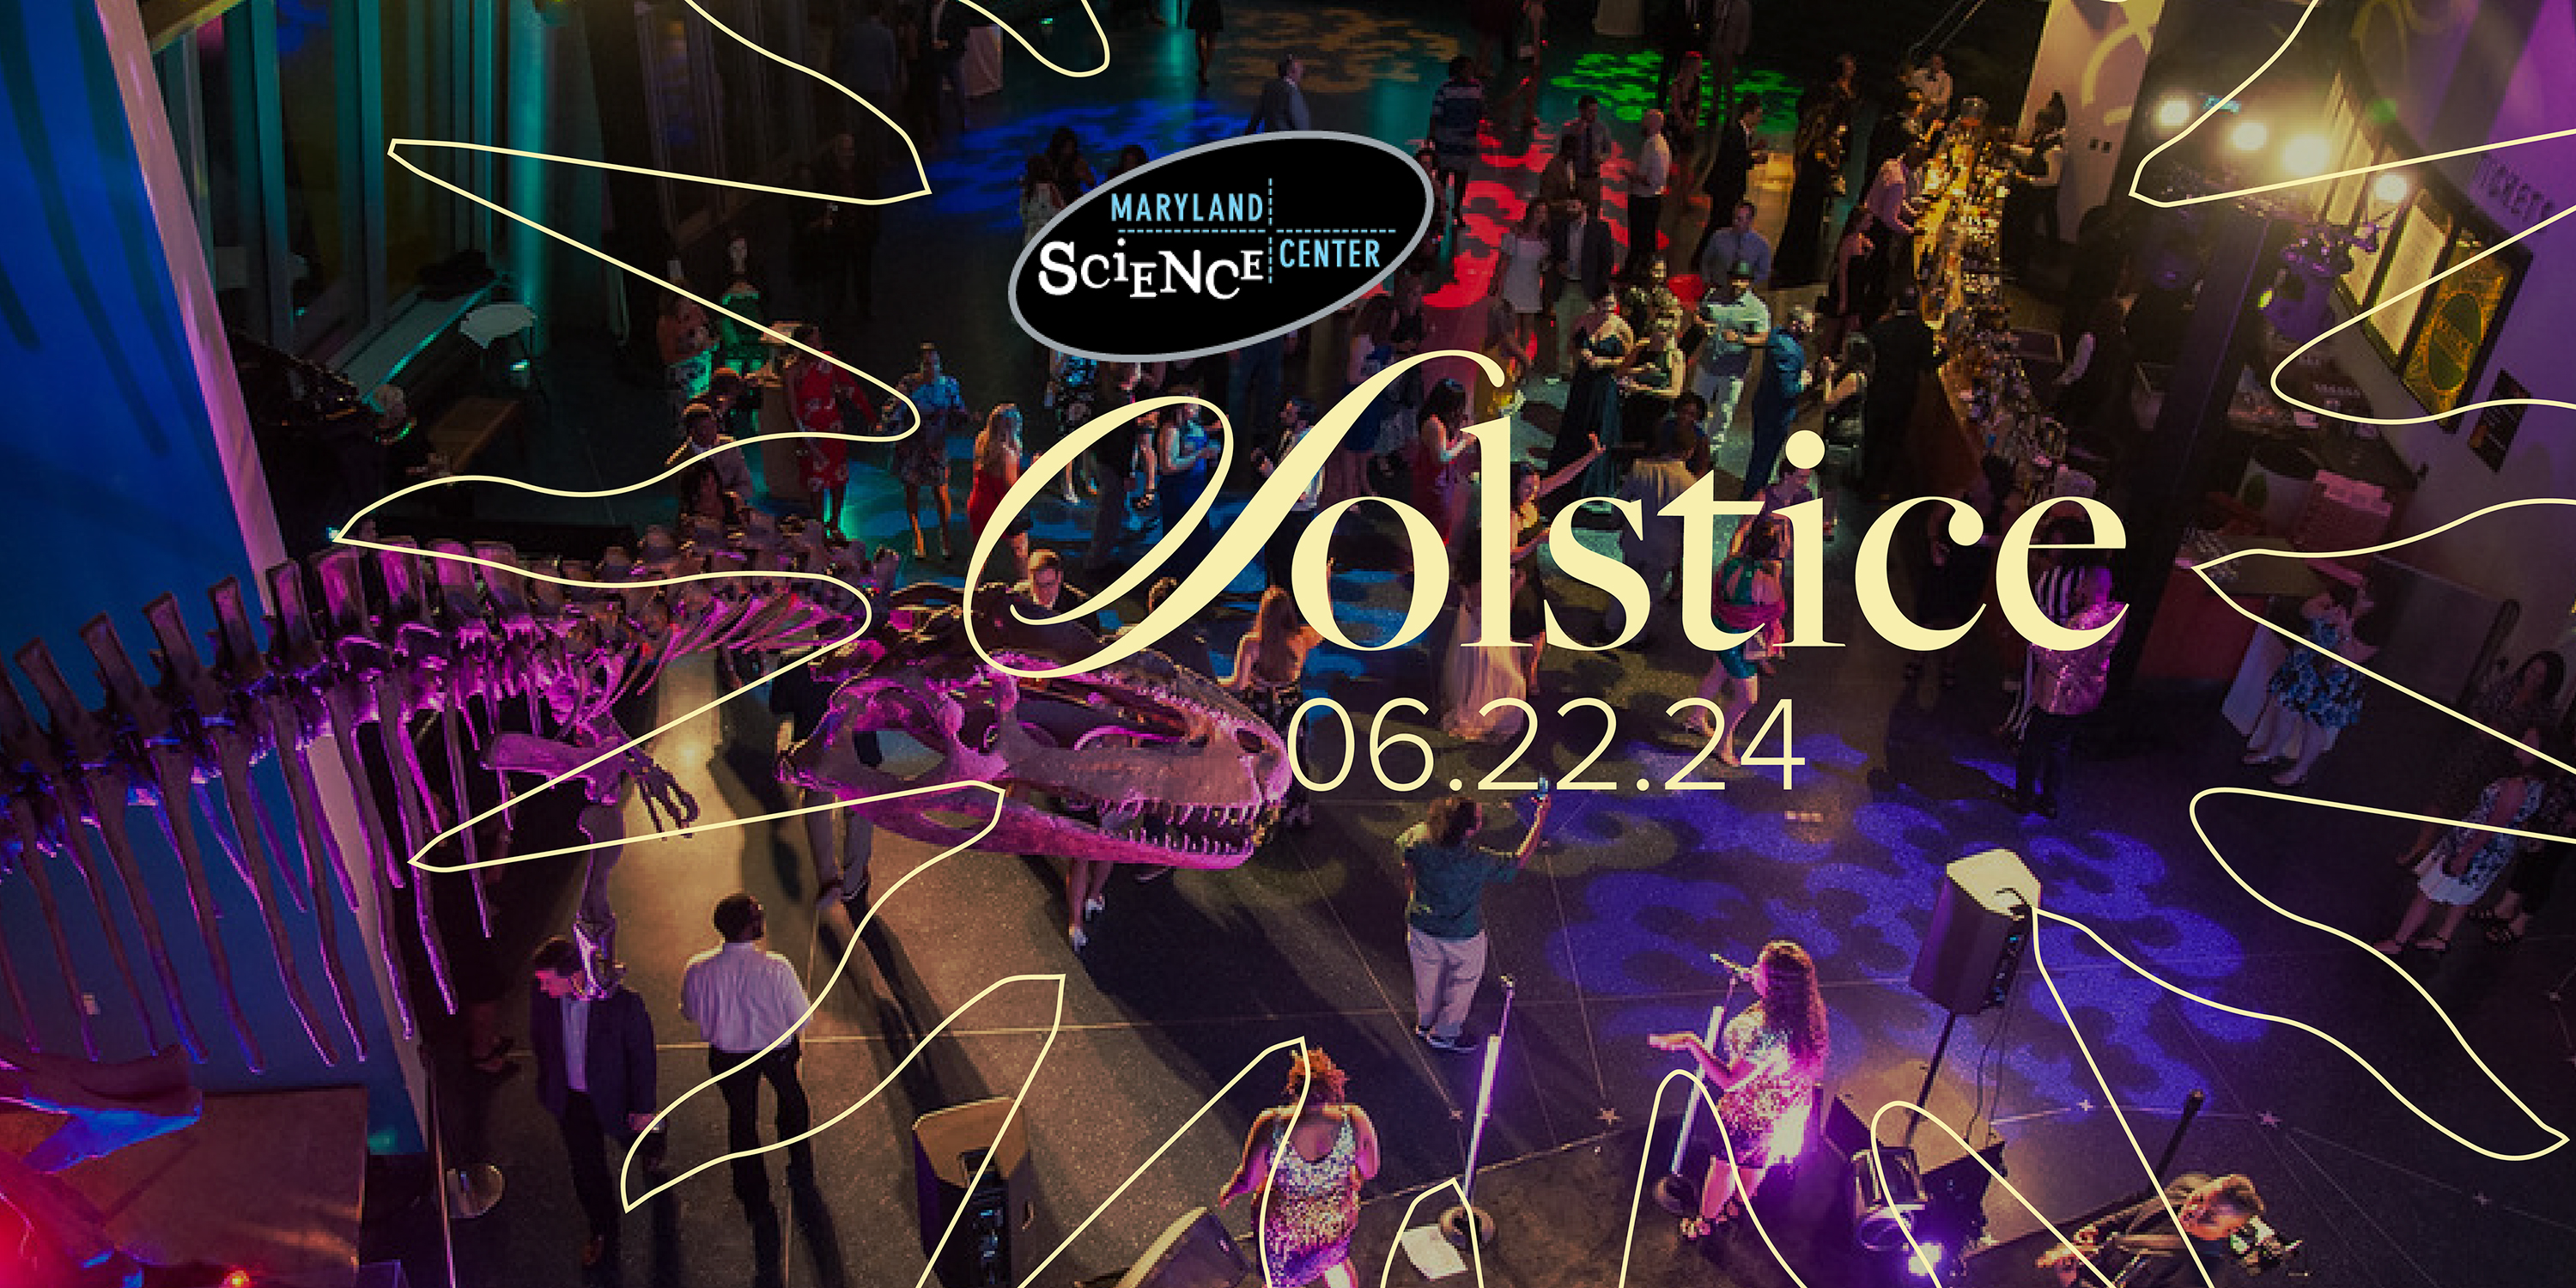 The Maryland Science Center is holding a Solstice event from 8 p.m.-midnight on June 22, 2024.(Handout)